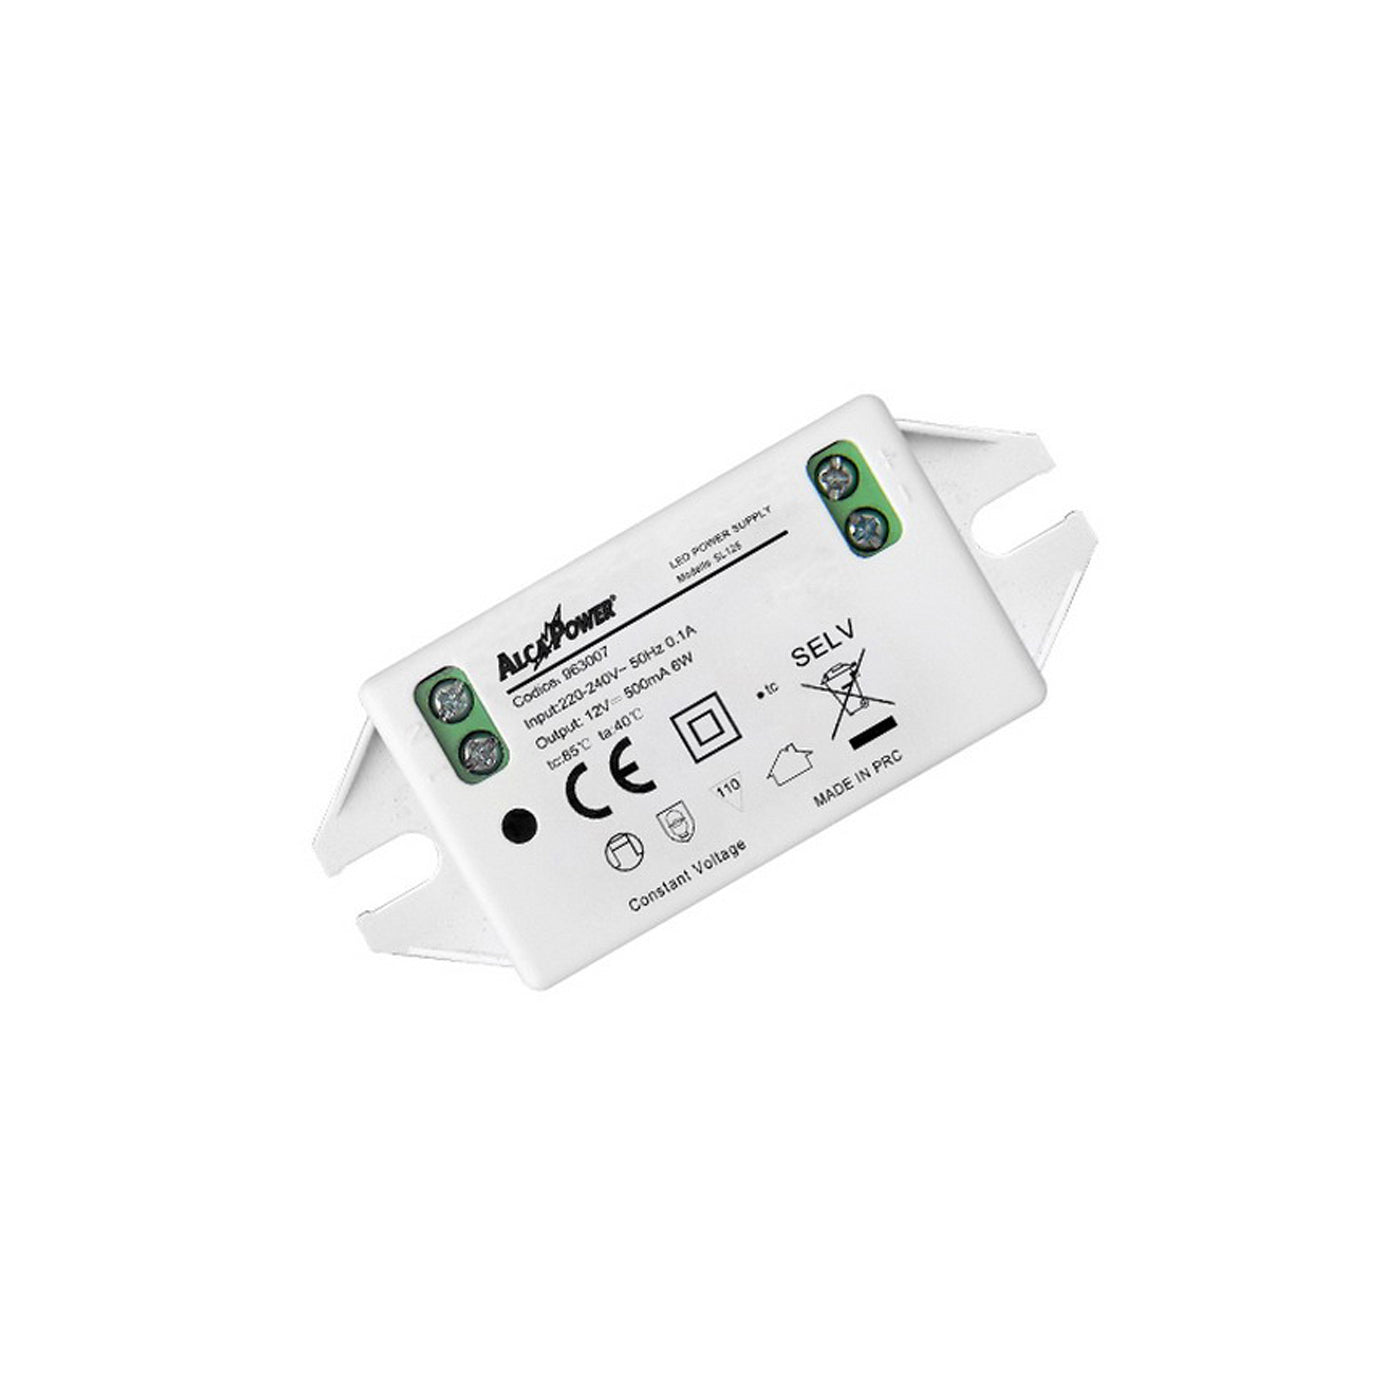 Alcapower IP20 Switching Power Supply, 12V power supply, 6W 0.5A, power supply for lighting technology